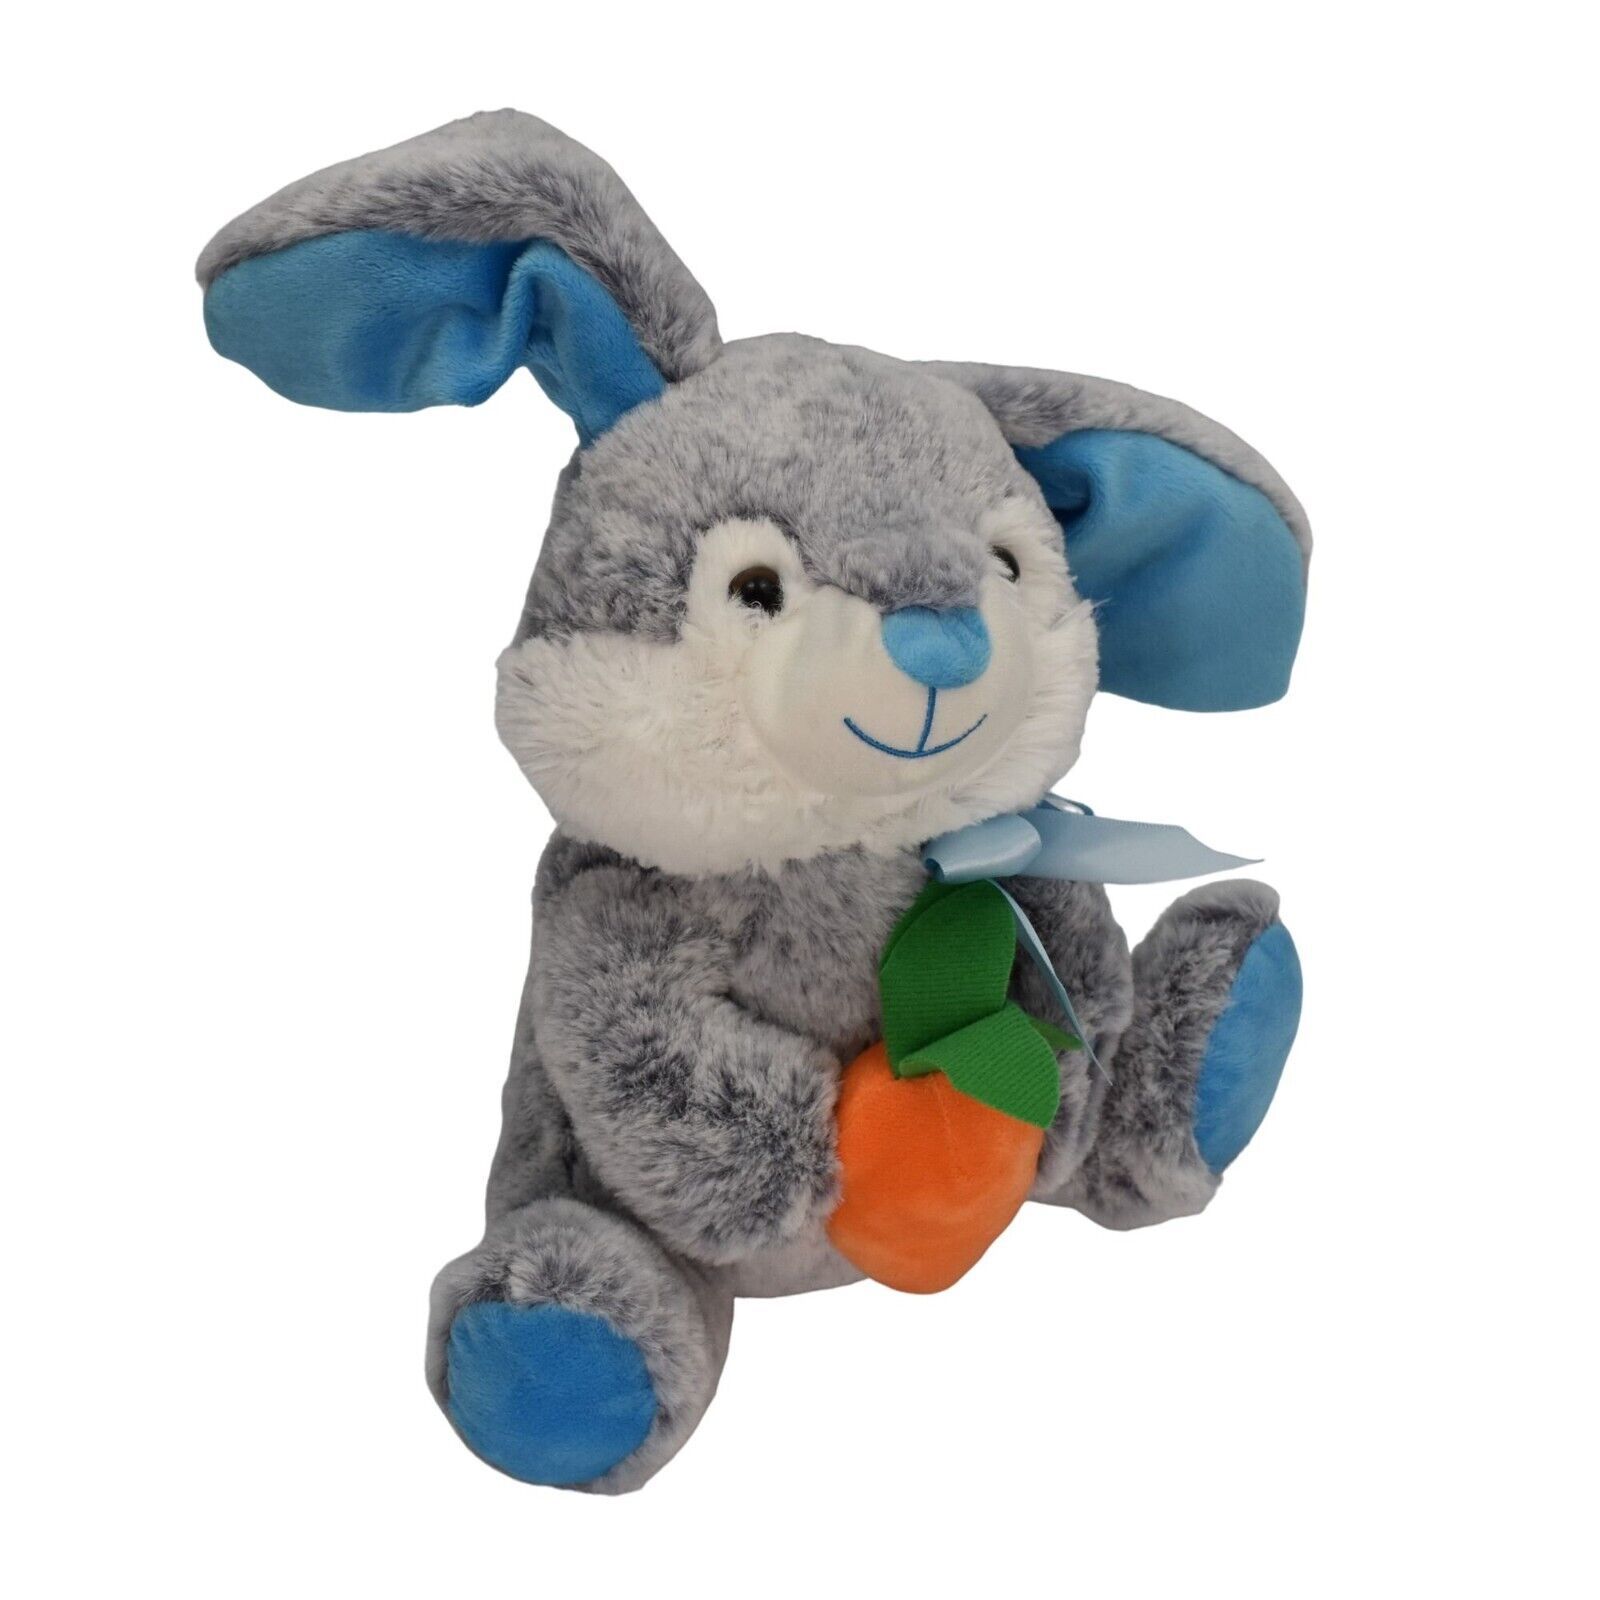 Goffa Plush Easter Bunny Rabbit Animated Dancing and Singing the Bunny Hop - $21.99